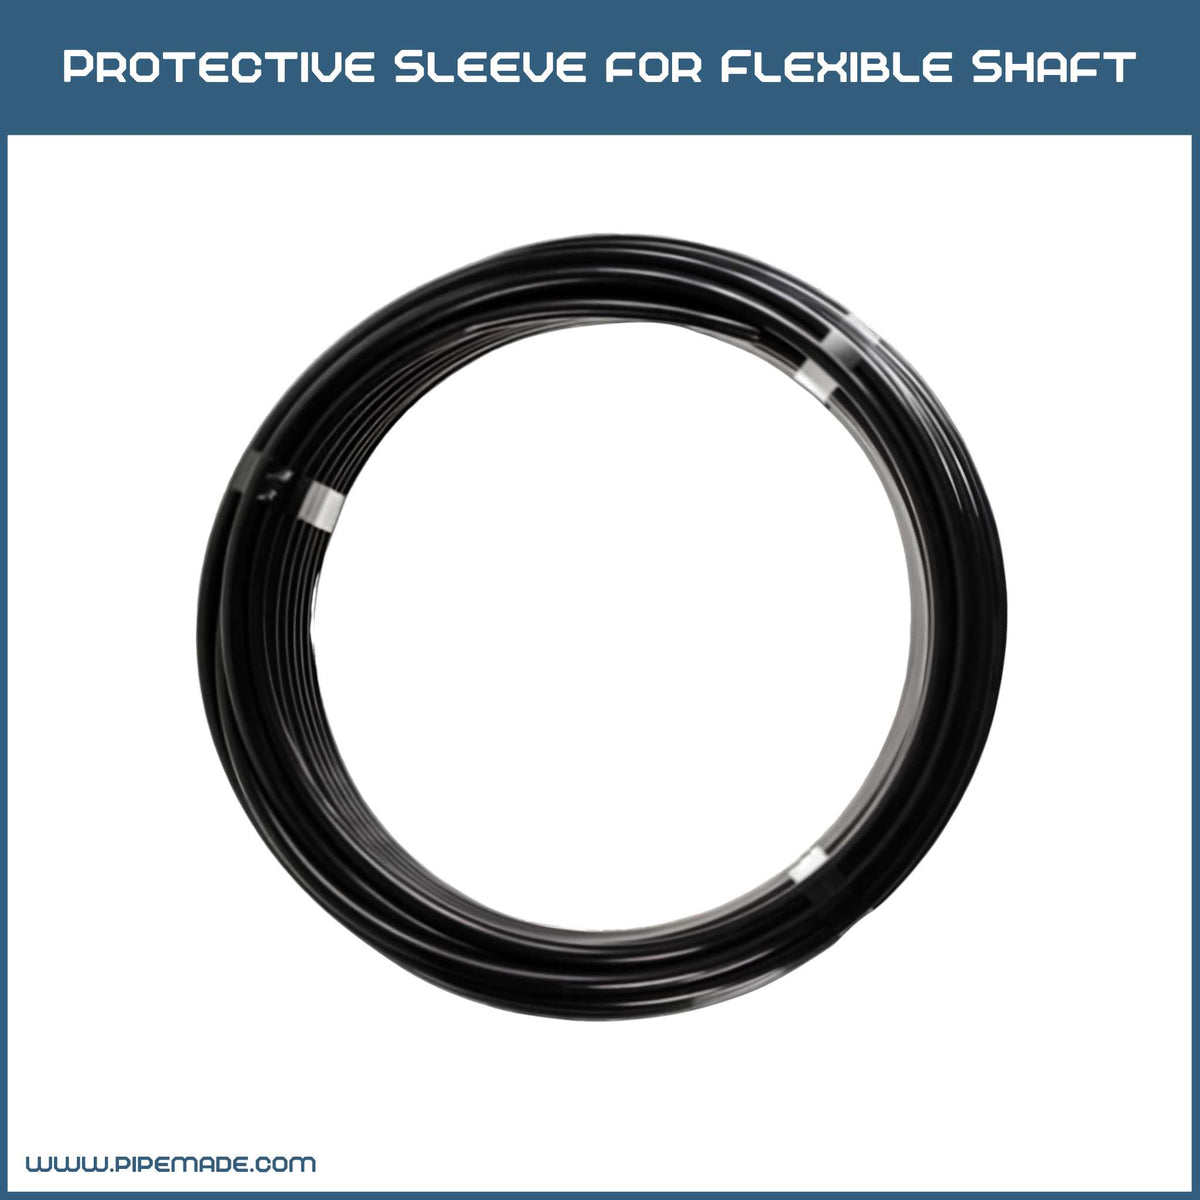 Protective Sleeve for Flexible Shaft